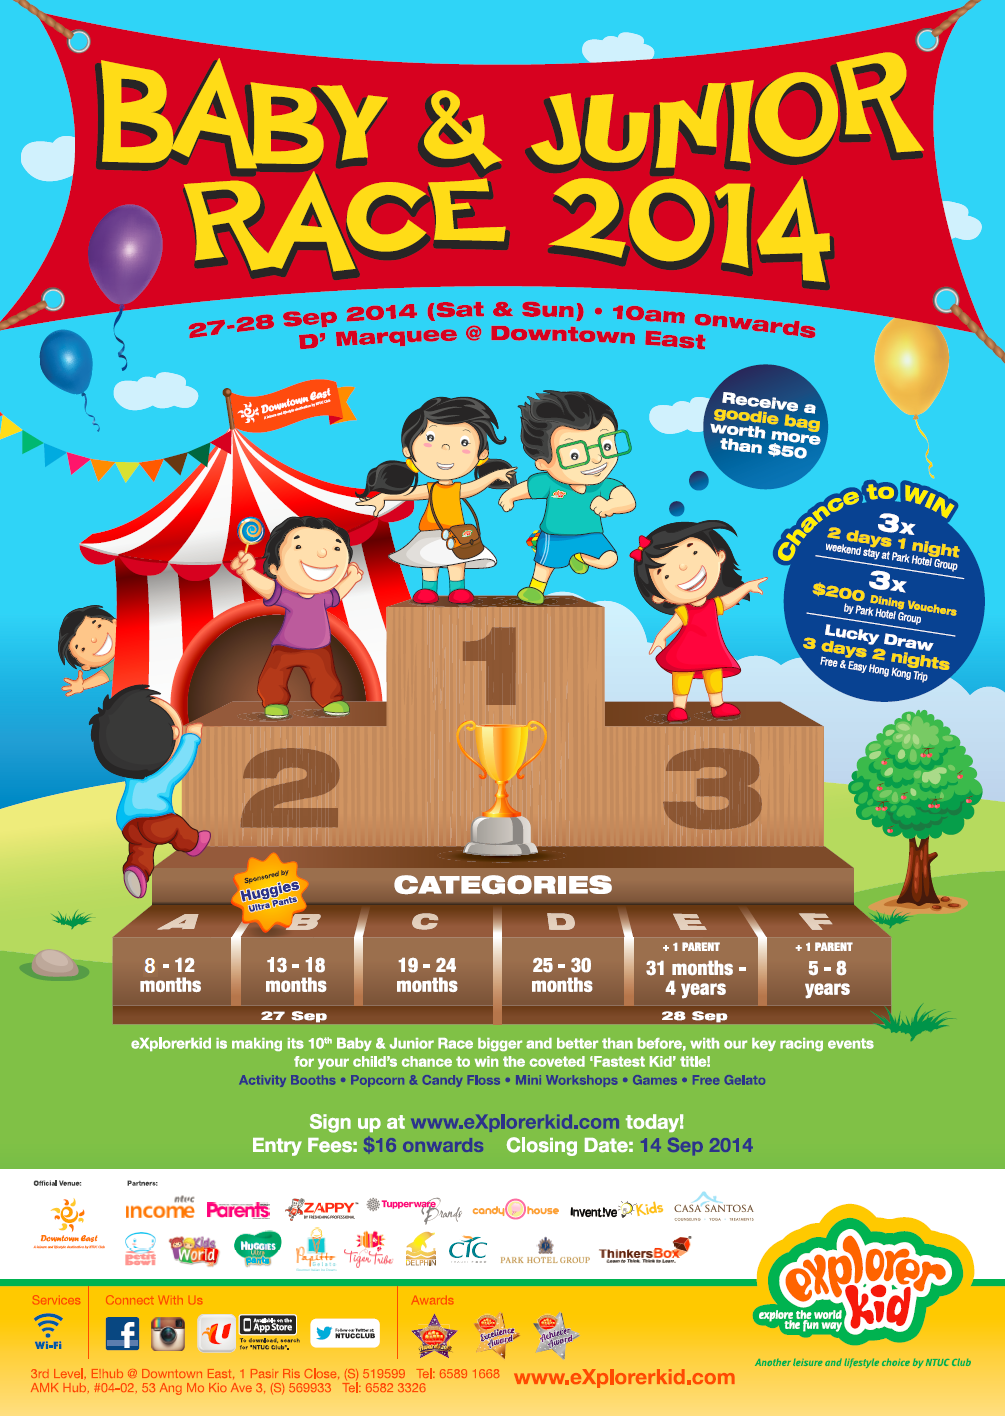 Baby & Junior Race 2014 27-28 Sep 2014 (Sat & Sun) - 10am onwards at D' Marquee @ Downtown East. Receive a goodie bag worth more than $50. Chance to win 3x 2 days 1 night weekend stay at Park Hotel Group | 3x $200 Dining Vouchers by Park Hotel Group | Lucky Draw - 3 days 2 nights Free & Easy Hong Kong Trip. eXplorekid is making its 10th Baby & Junior Race bigger and better than before, with our key racing events for your child's chance to win the coveted 'Fastest Kid' title! Activity booths * Popcorn & Candy Floss * Mini Workshops * Games * Free Gelato. Sign up at www.eXplorerkid.com today! Entry Fees at $16 onwards. Closing Date: 14 Sep 2014.